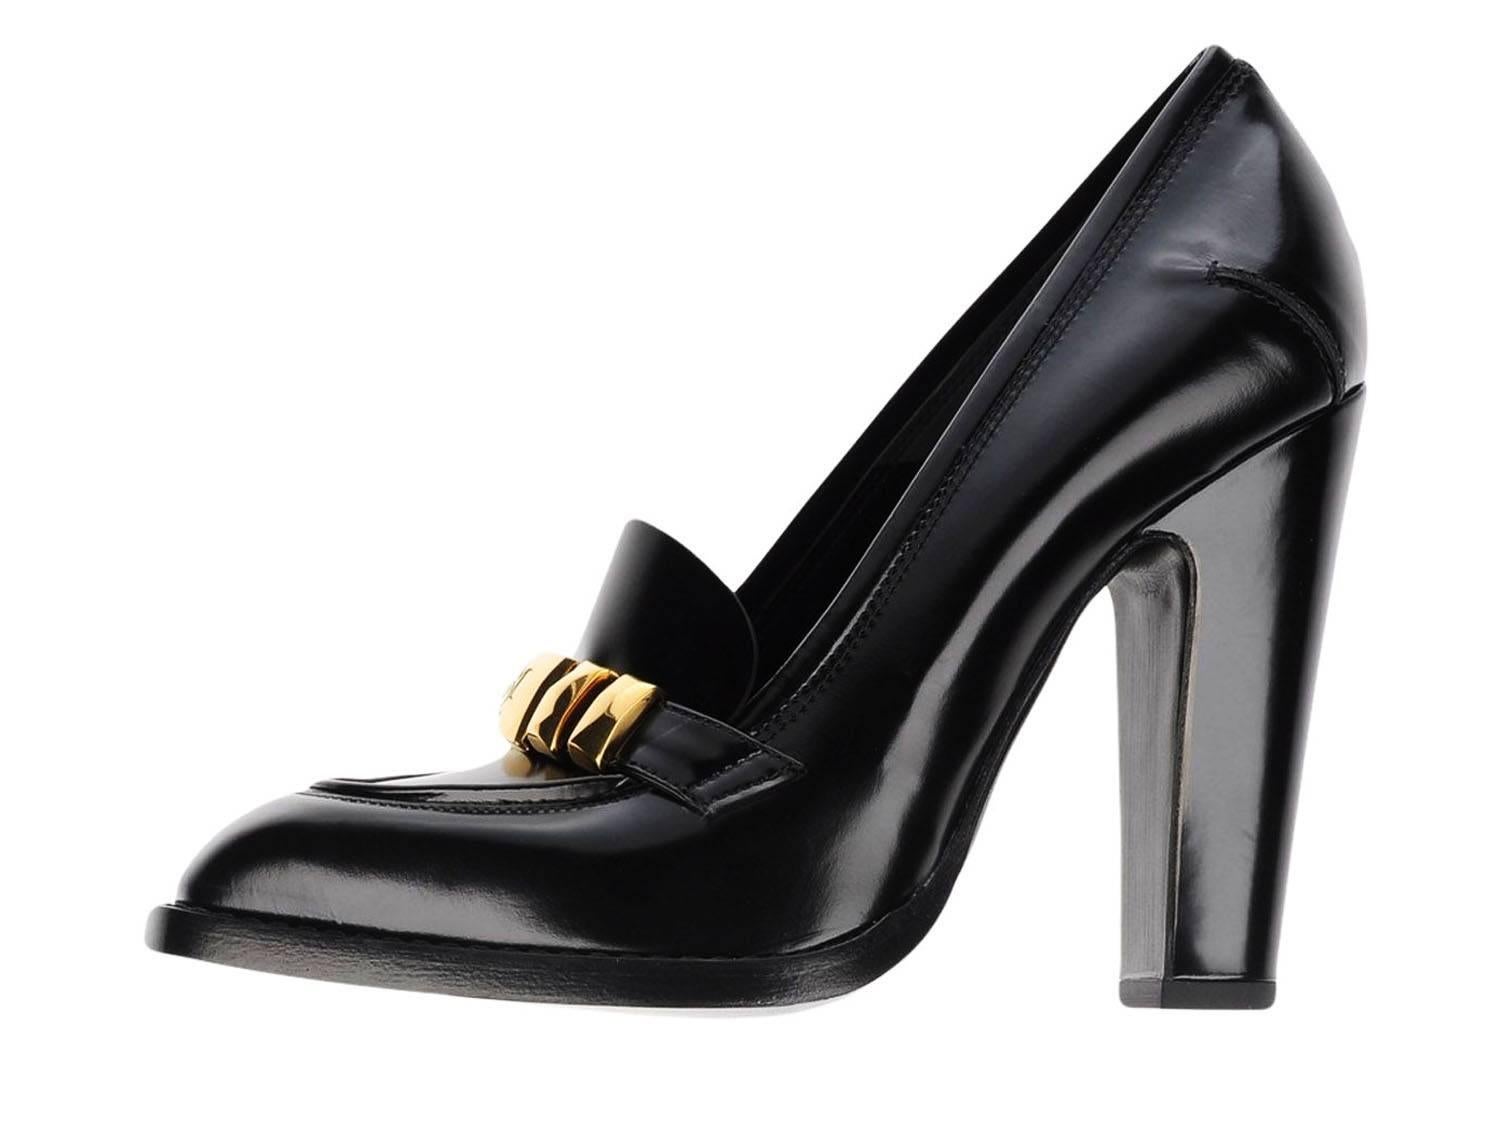 New Alexander McQueen Black Brushed Leather Pumps Heels
Designer sizes available - 36, 38.5, 39, 40.
Composition: 100% Calf
Gold colored metal logo detail.
4.5 inches brushed leather covered heel.
Stitched welt, Leather Sole and Insole.
Made in